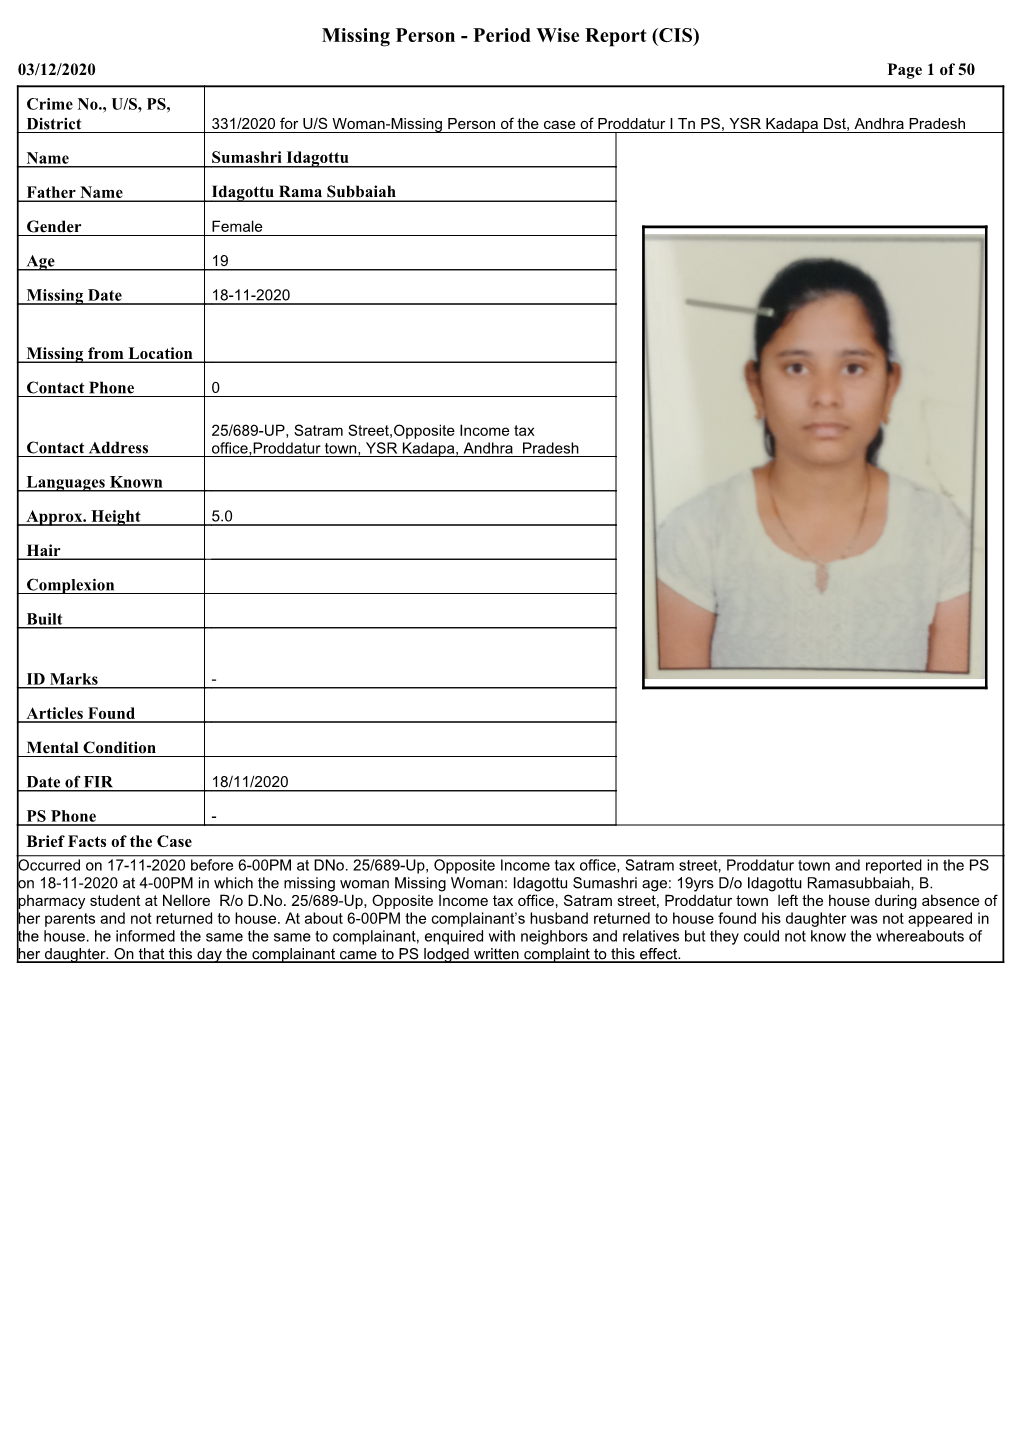 Missing Person - Period Wise Report (CIS) 03/12/2020 Page 1 of 50